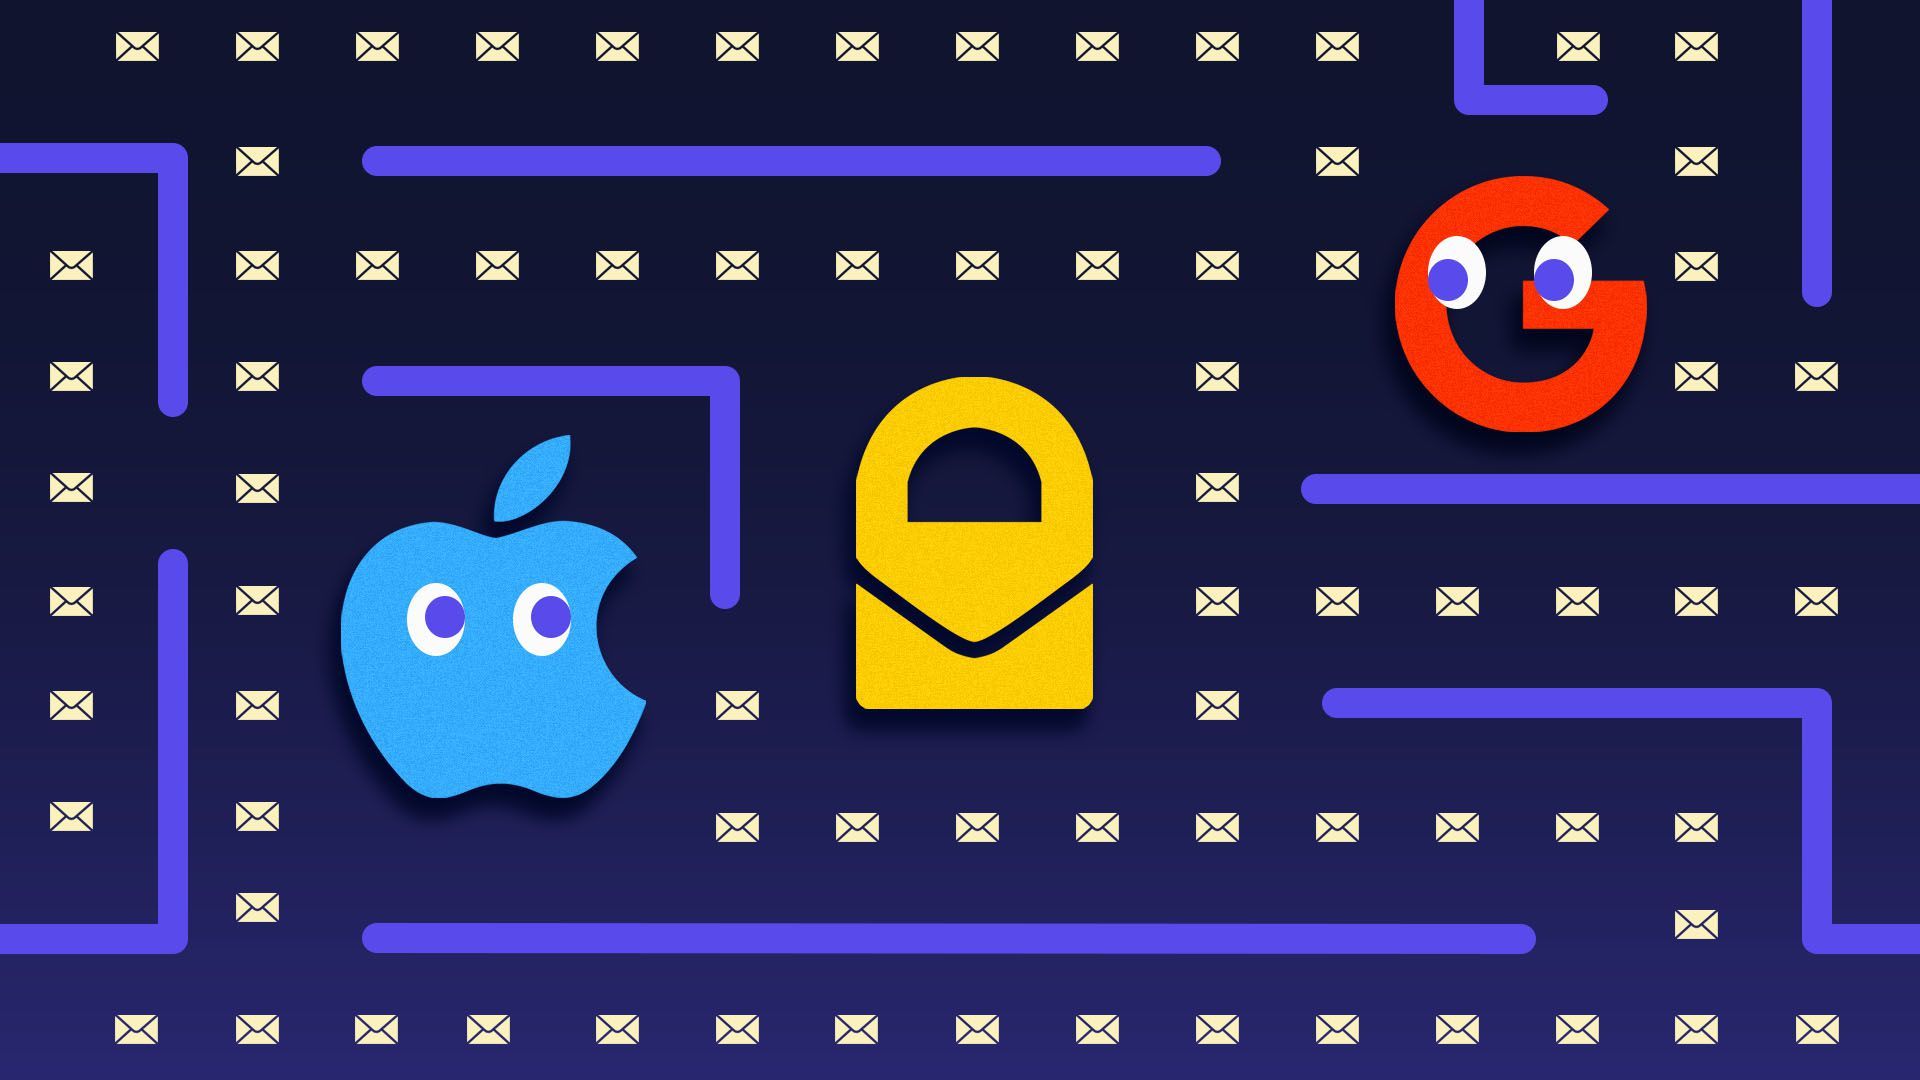 Illustration of a the Google, Protonmail, and Gmail logos as PacMan characters 